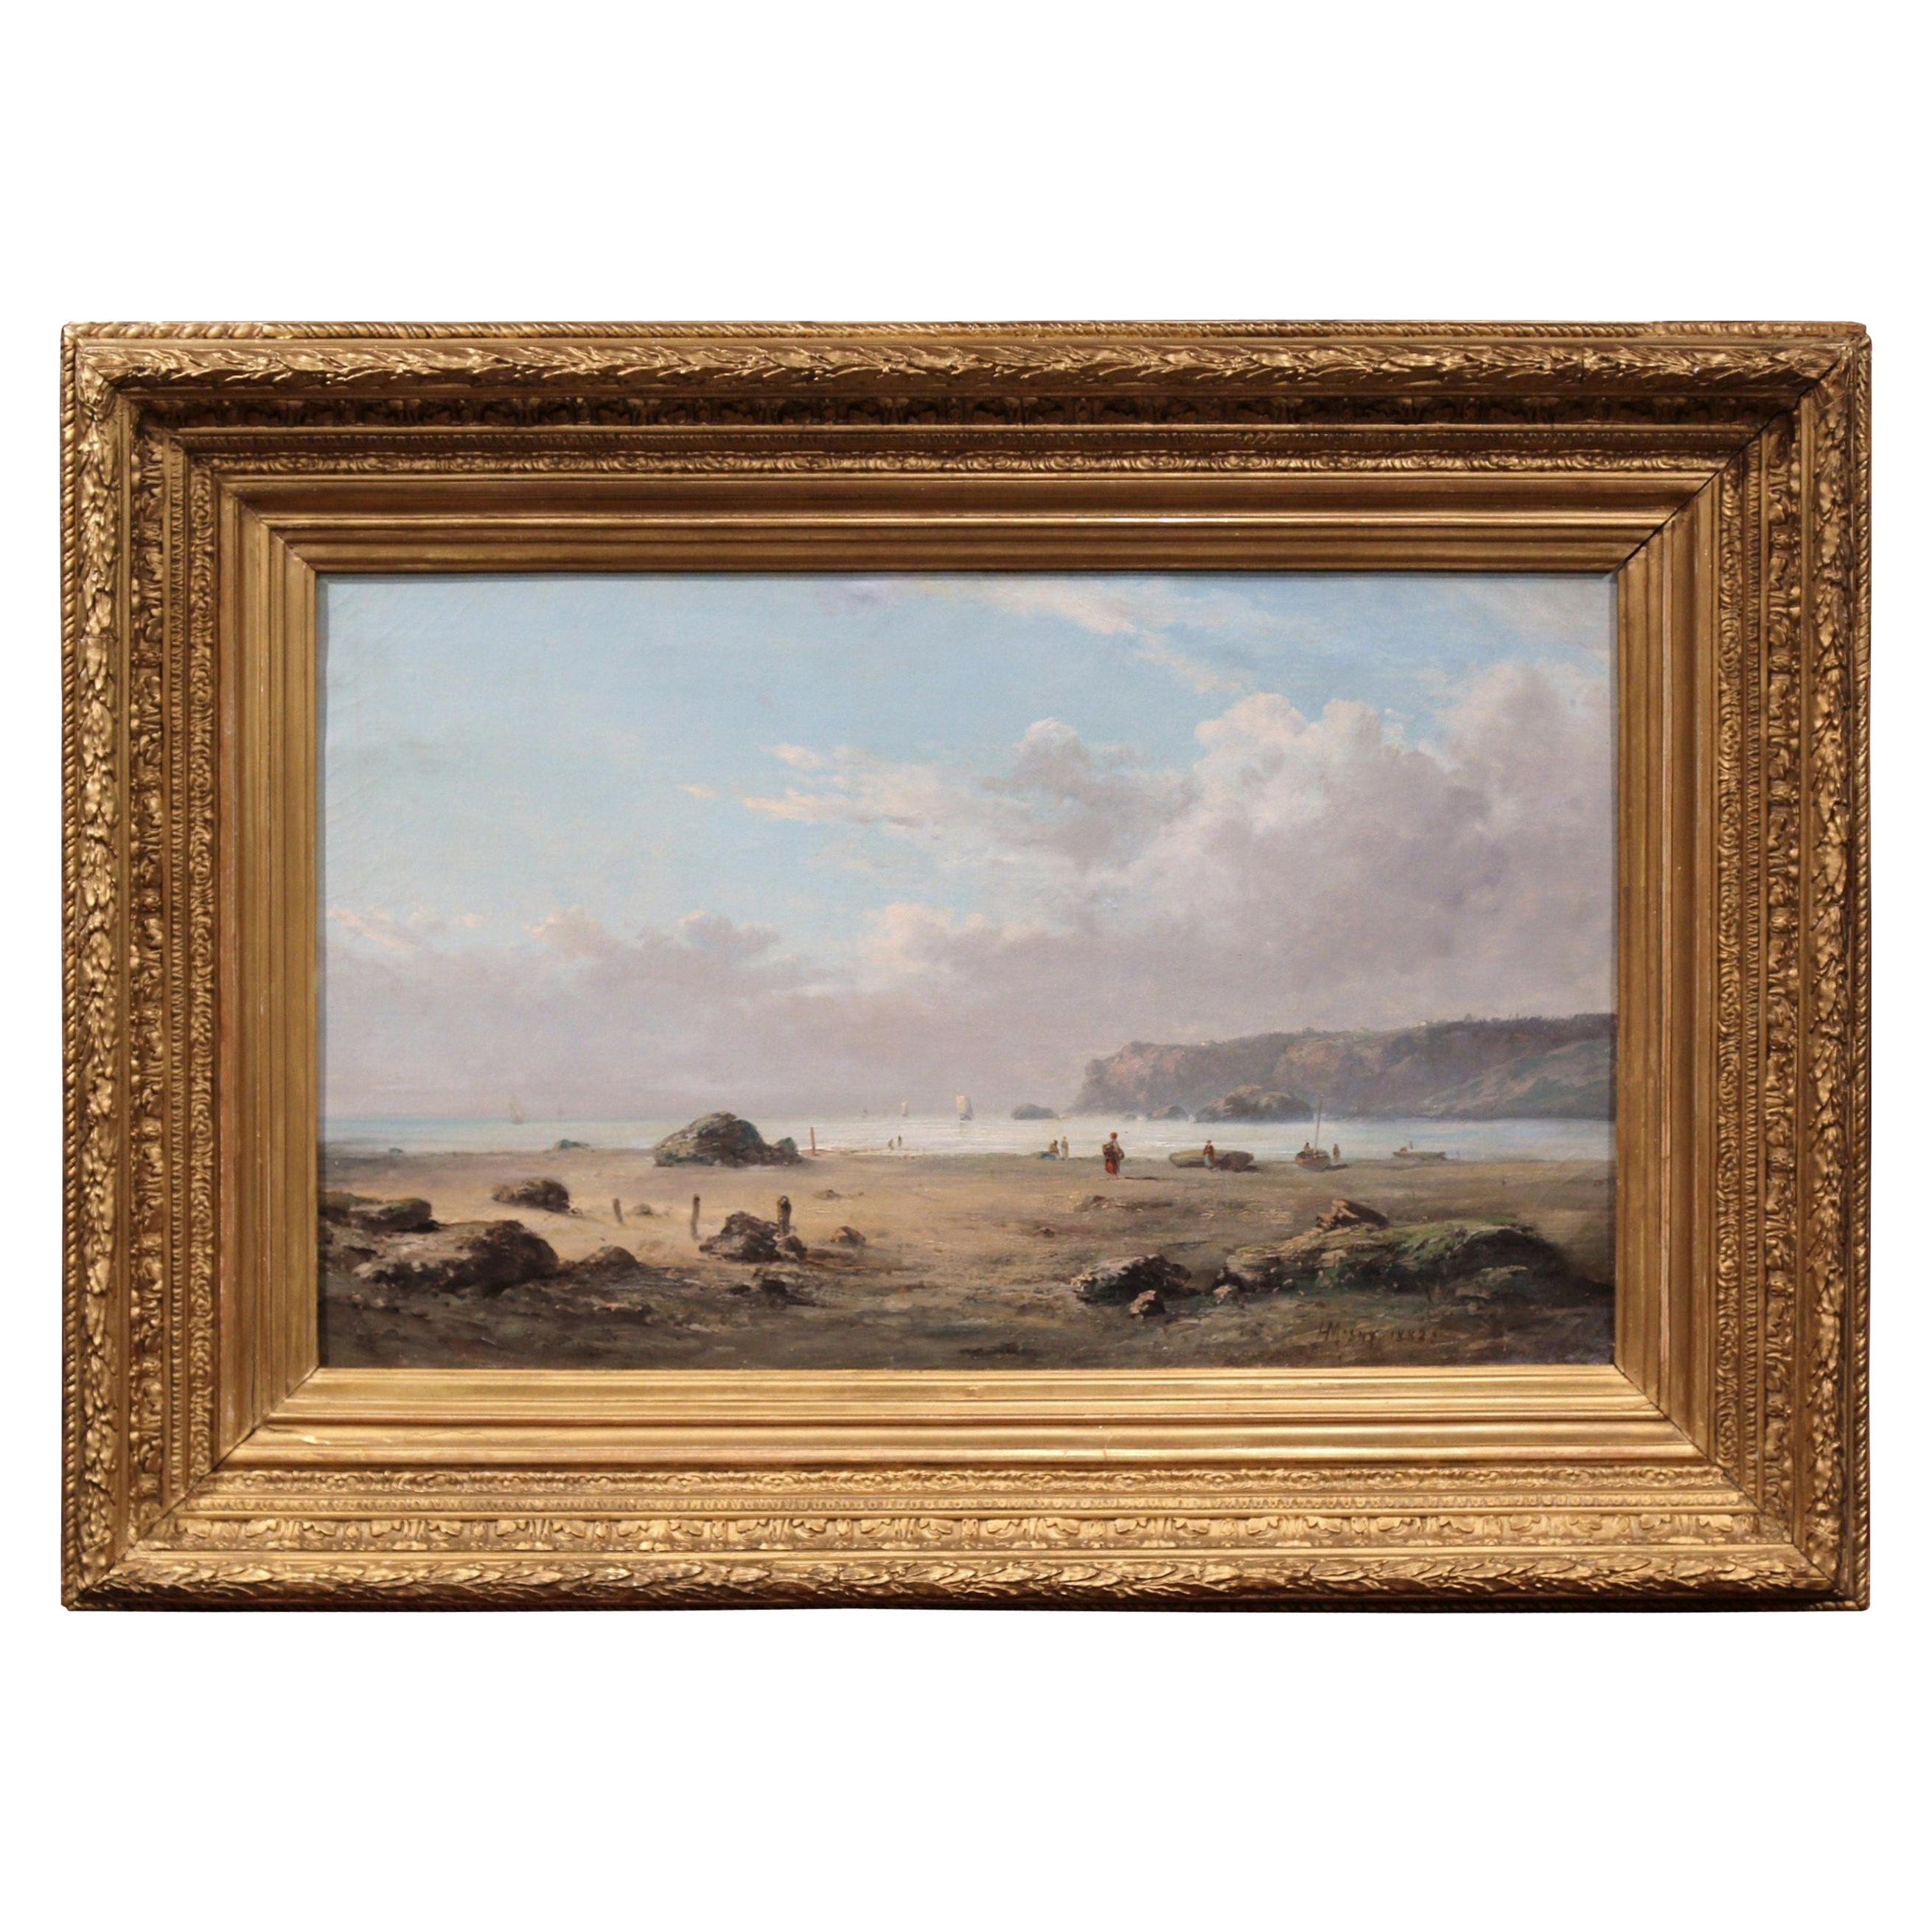 19th Century French Brittany Coast Landscape Painting Signed Masny Dated 1882